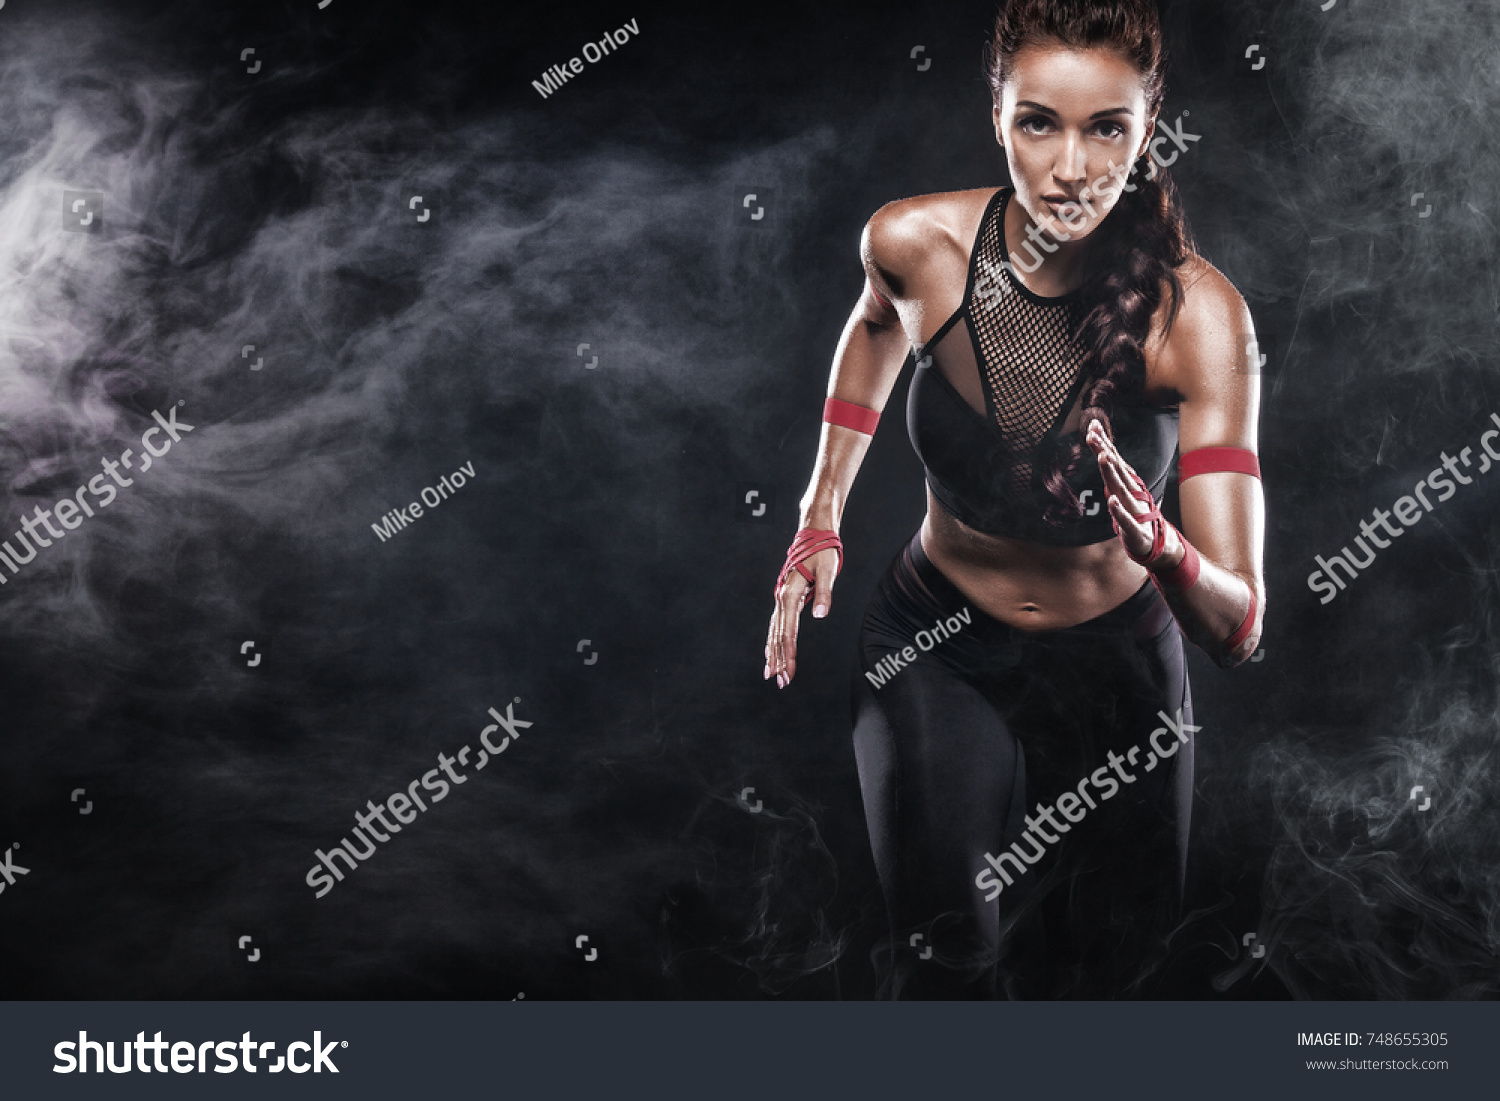 A strong athletic, woman sprinter, running on black background wearing in the sportswear, fitness and sport motivation. Runner concept with copy space. #748655305